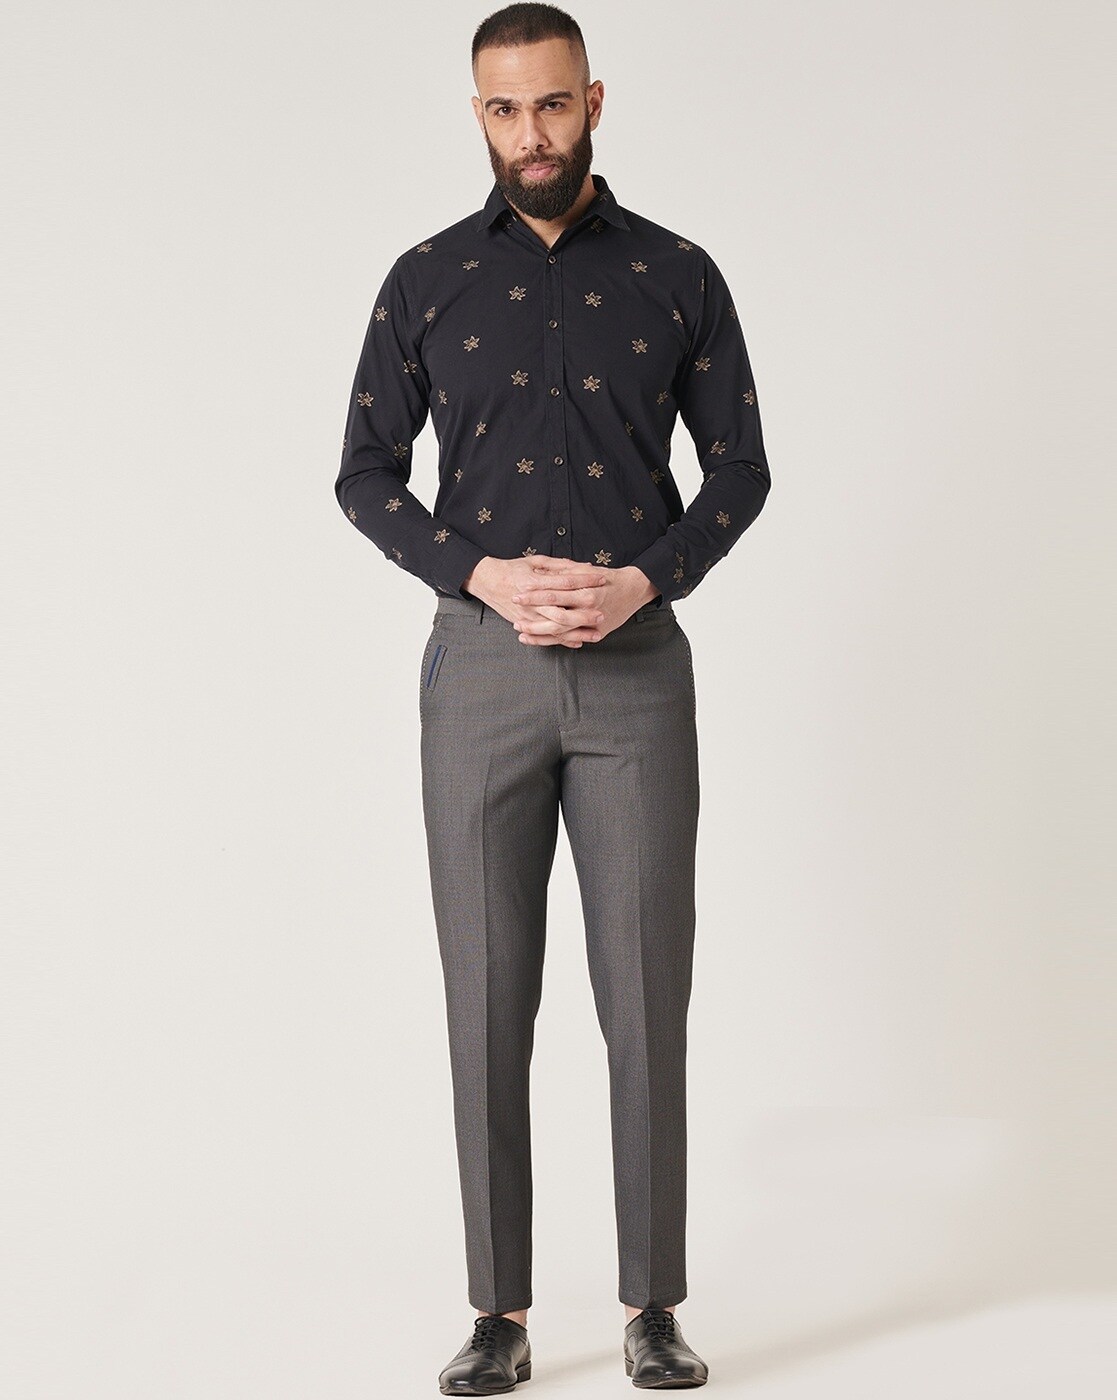 Buy Grey Trousers & Pants for Men by Mr Button Online